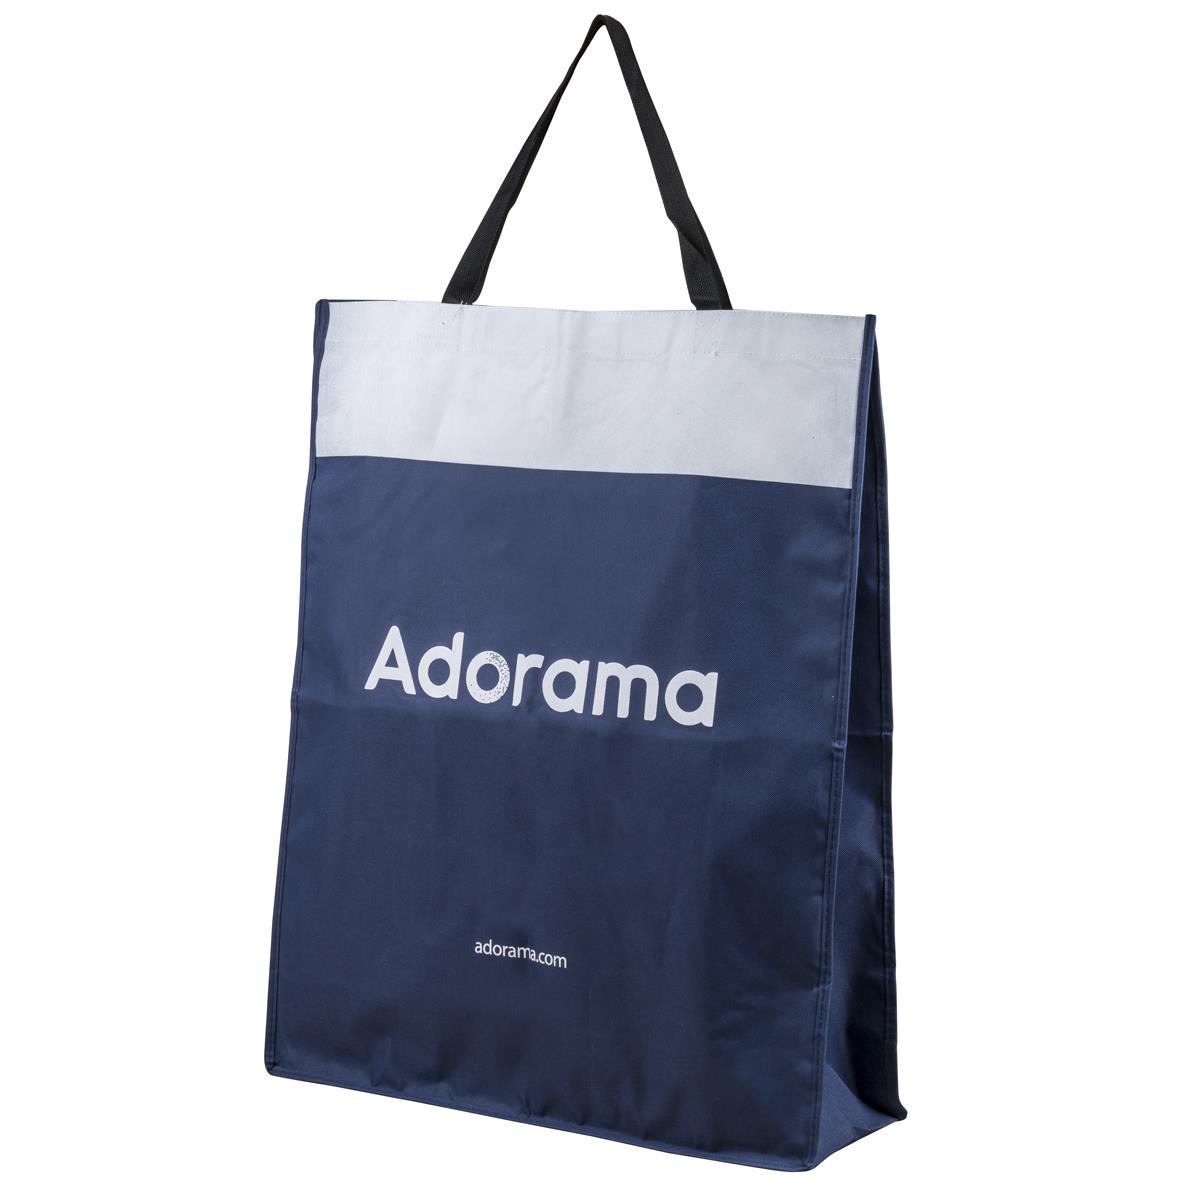 Image of Adorama Blue Bag Woven Canvas H30xW24xD8inch